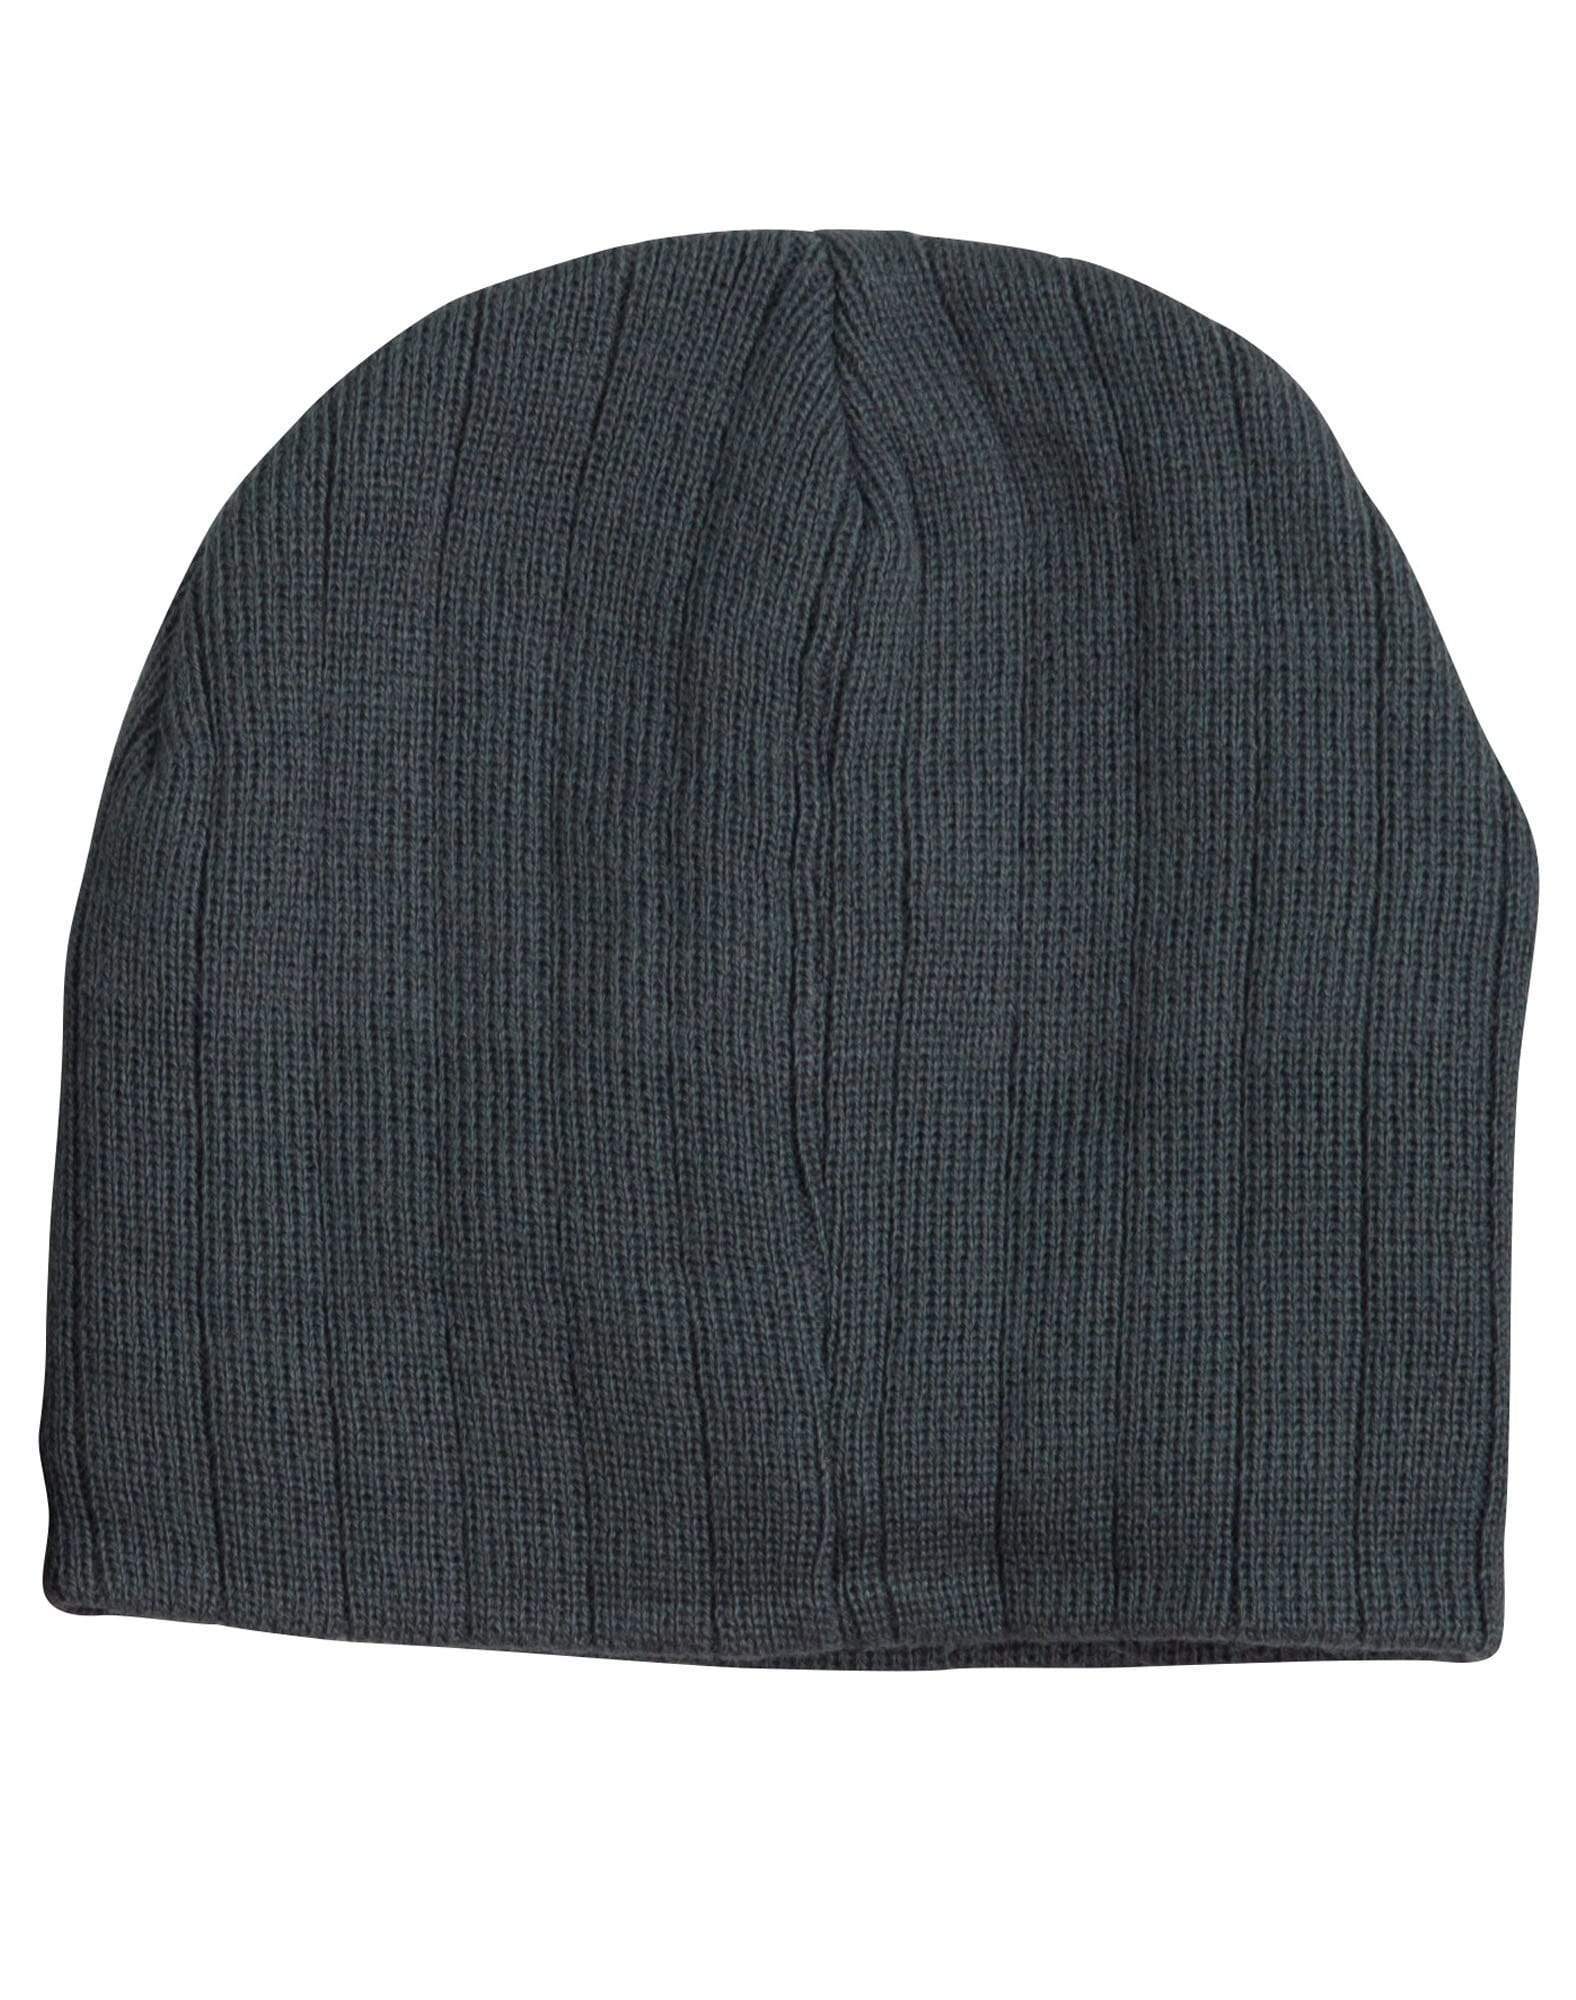 Cable Knit Beanie With Fleece Head BandCH64 Active Wear Winning Spirit Charcoal One size 